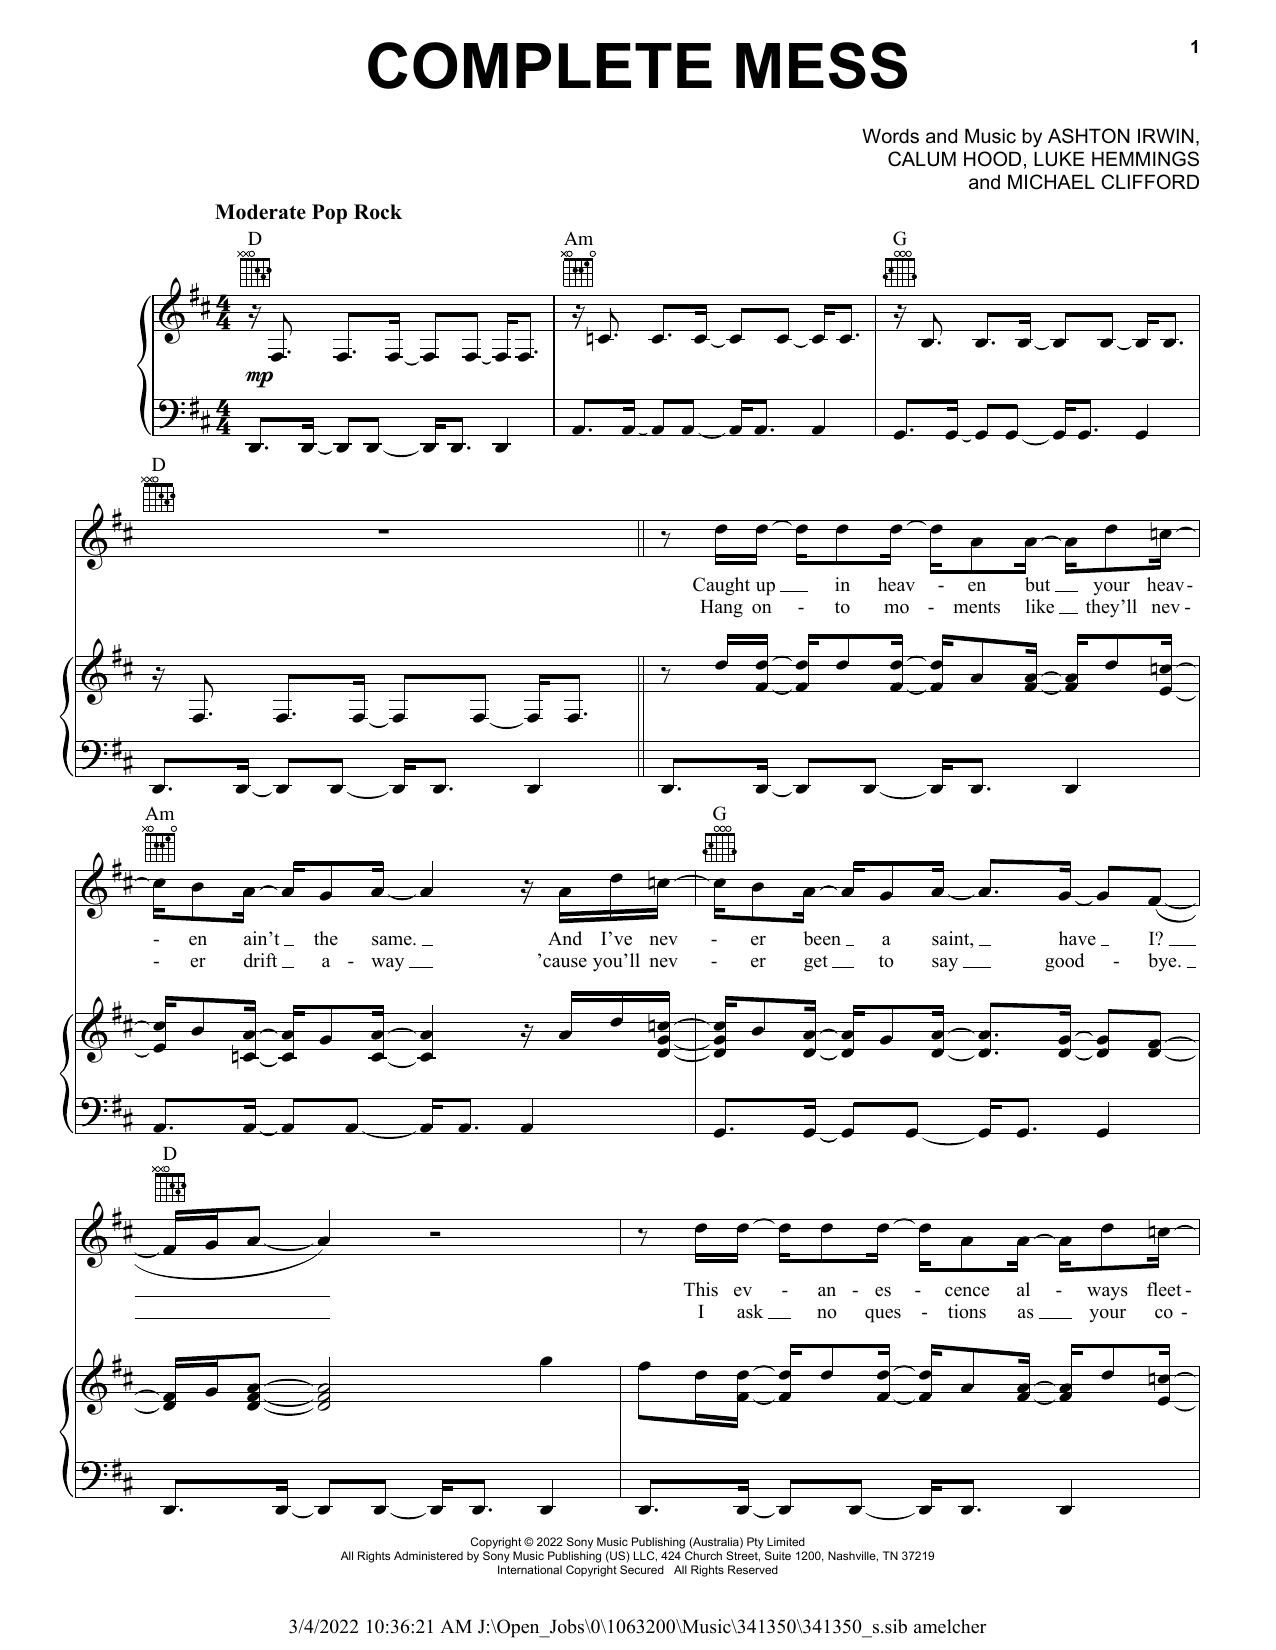 Download 5 Seconds of Summer Complete Mess Sheet Music